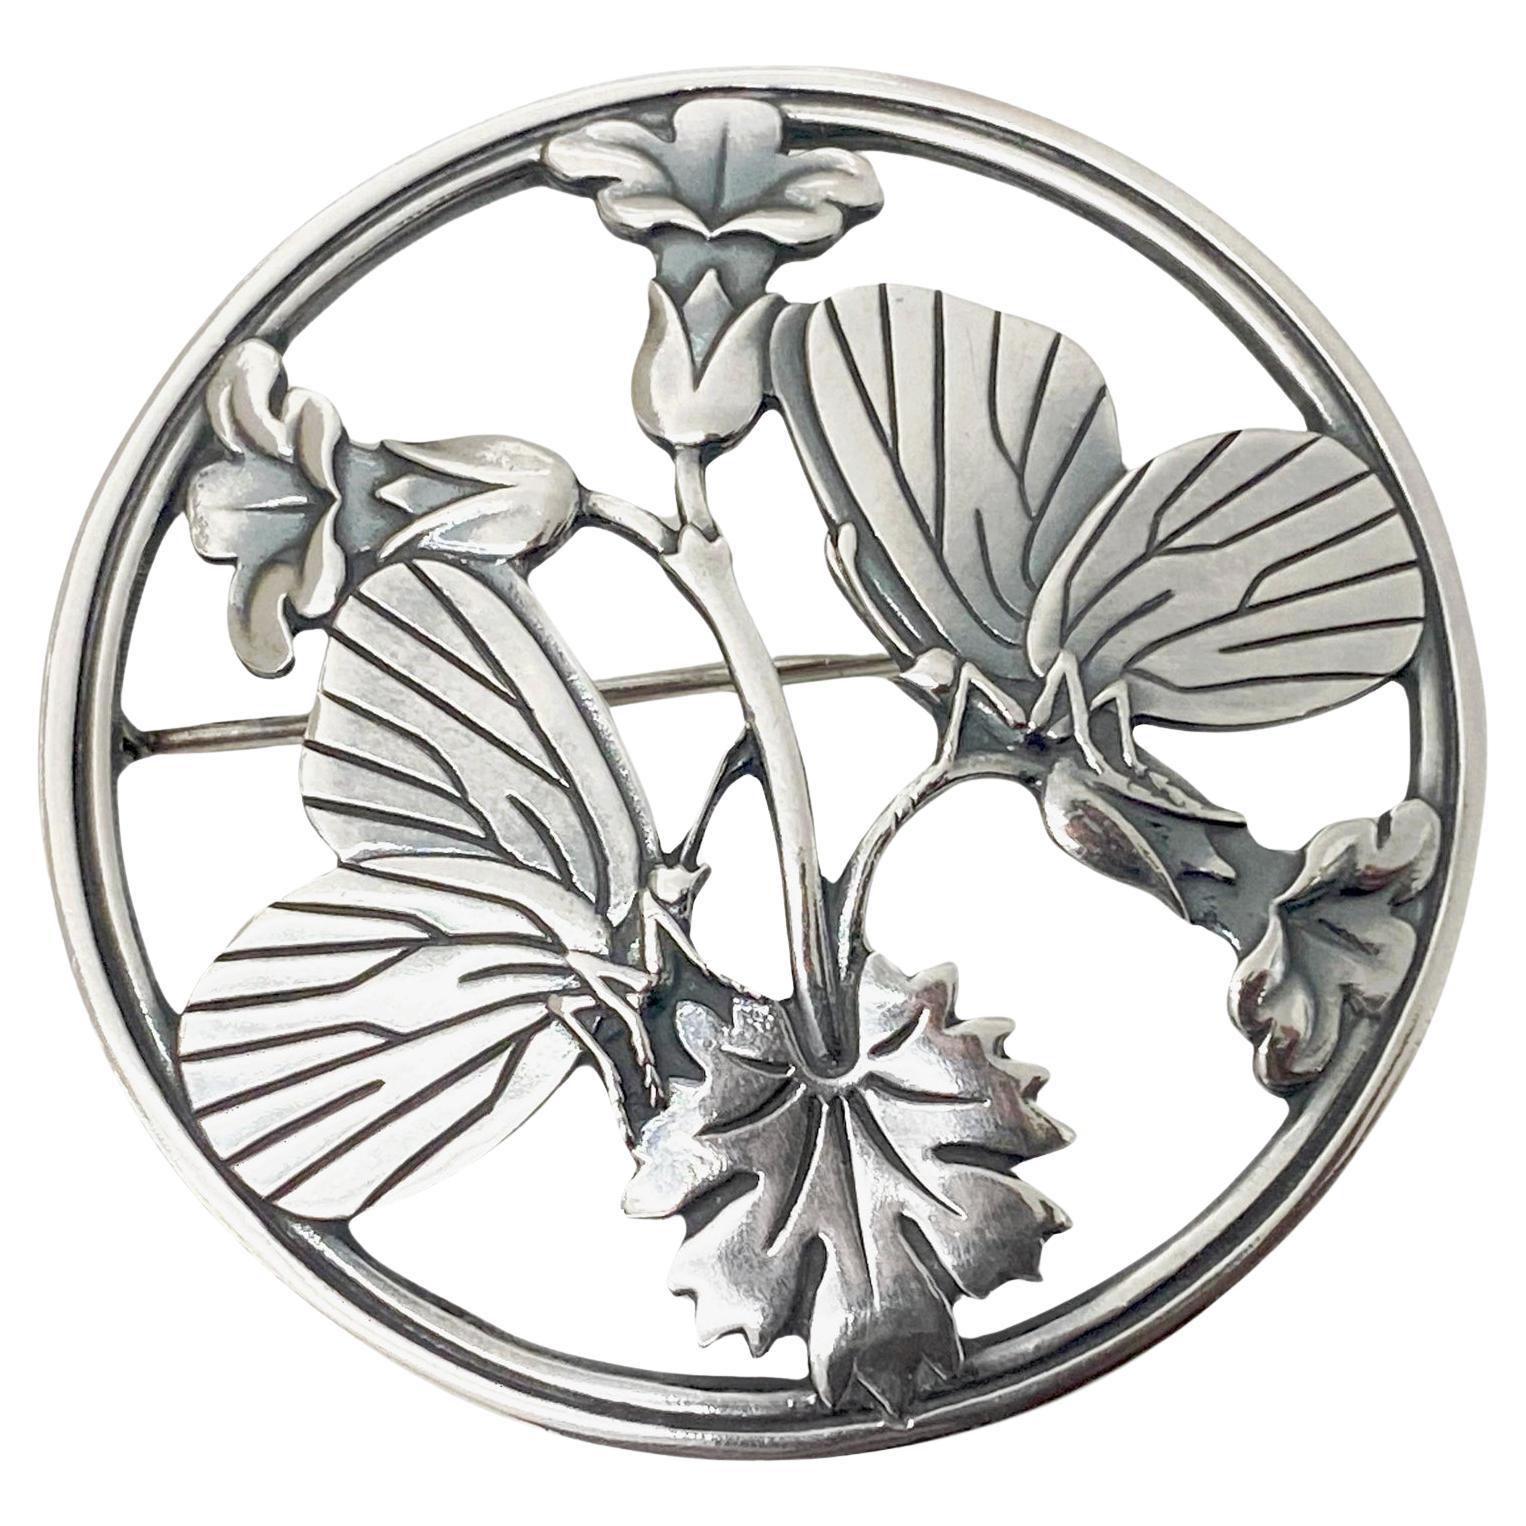 Georg Jensen Sterling Silver Butterfly and stylized Flowers Brooch C.1940 For Sale